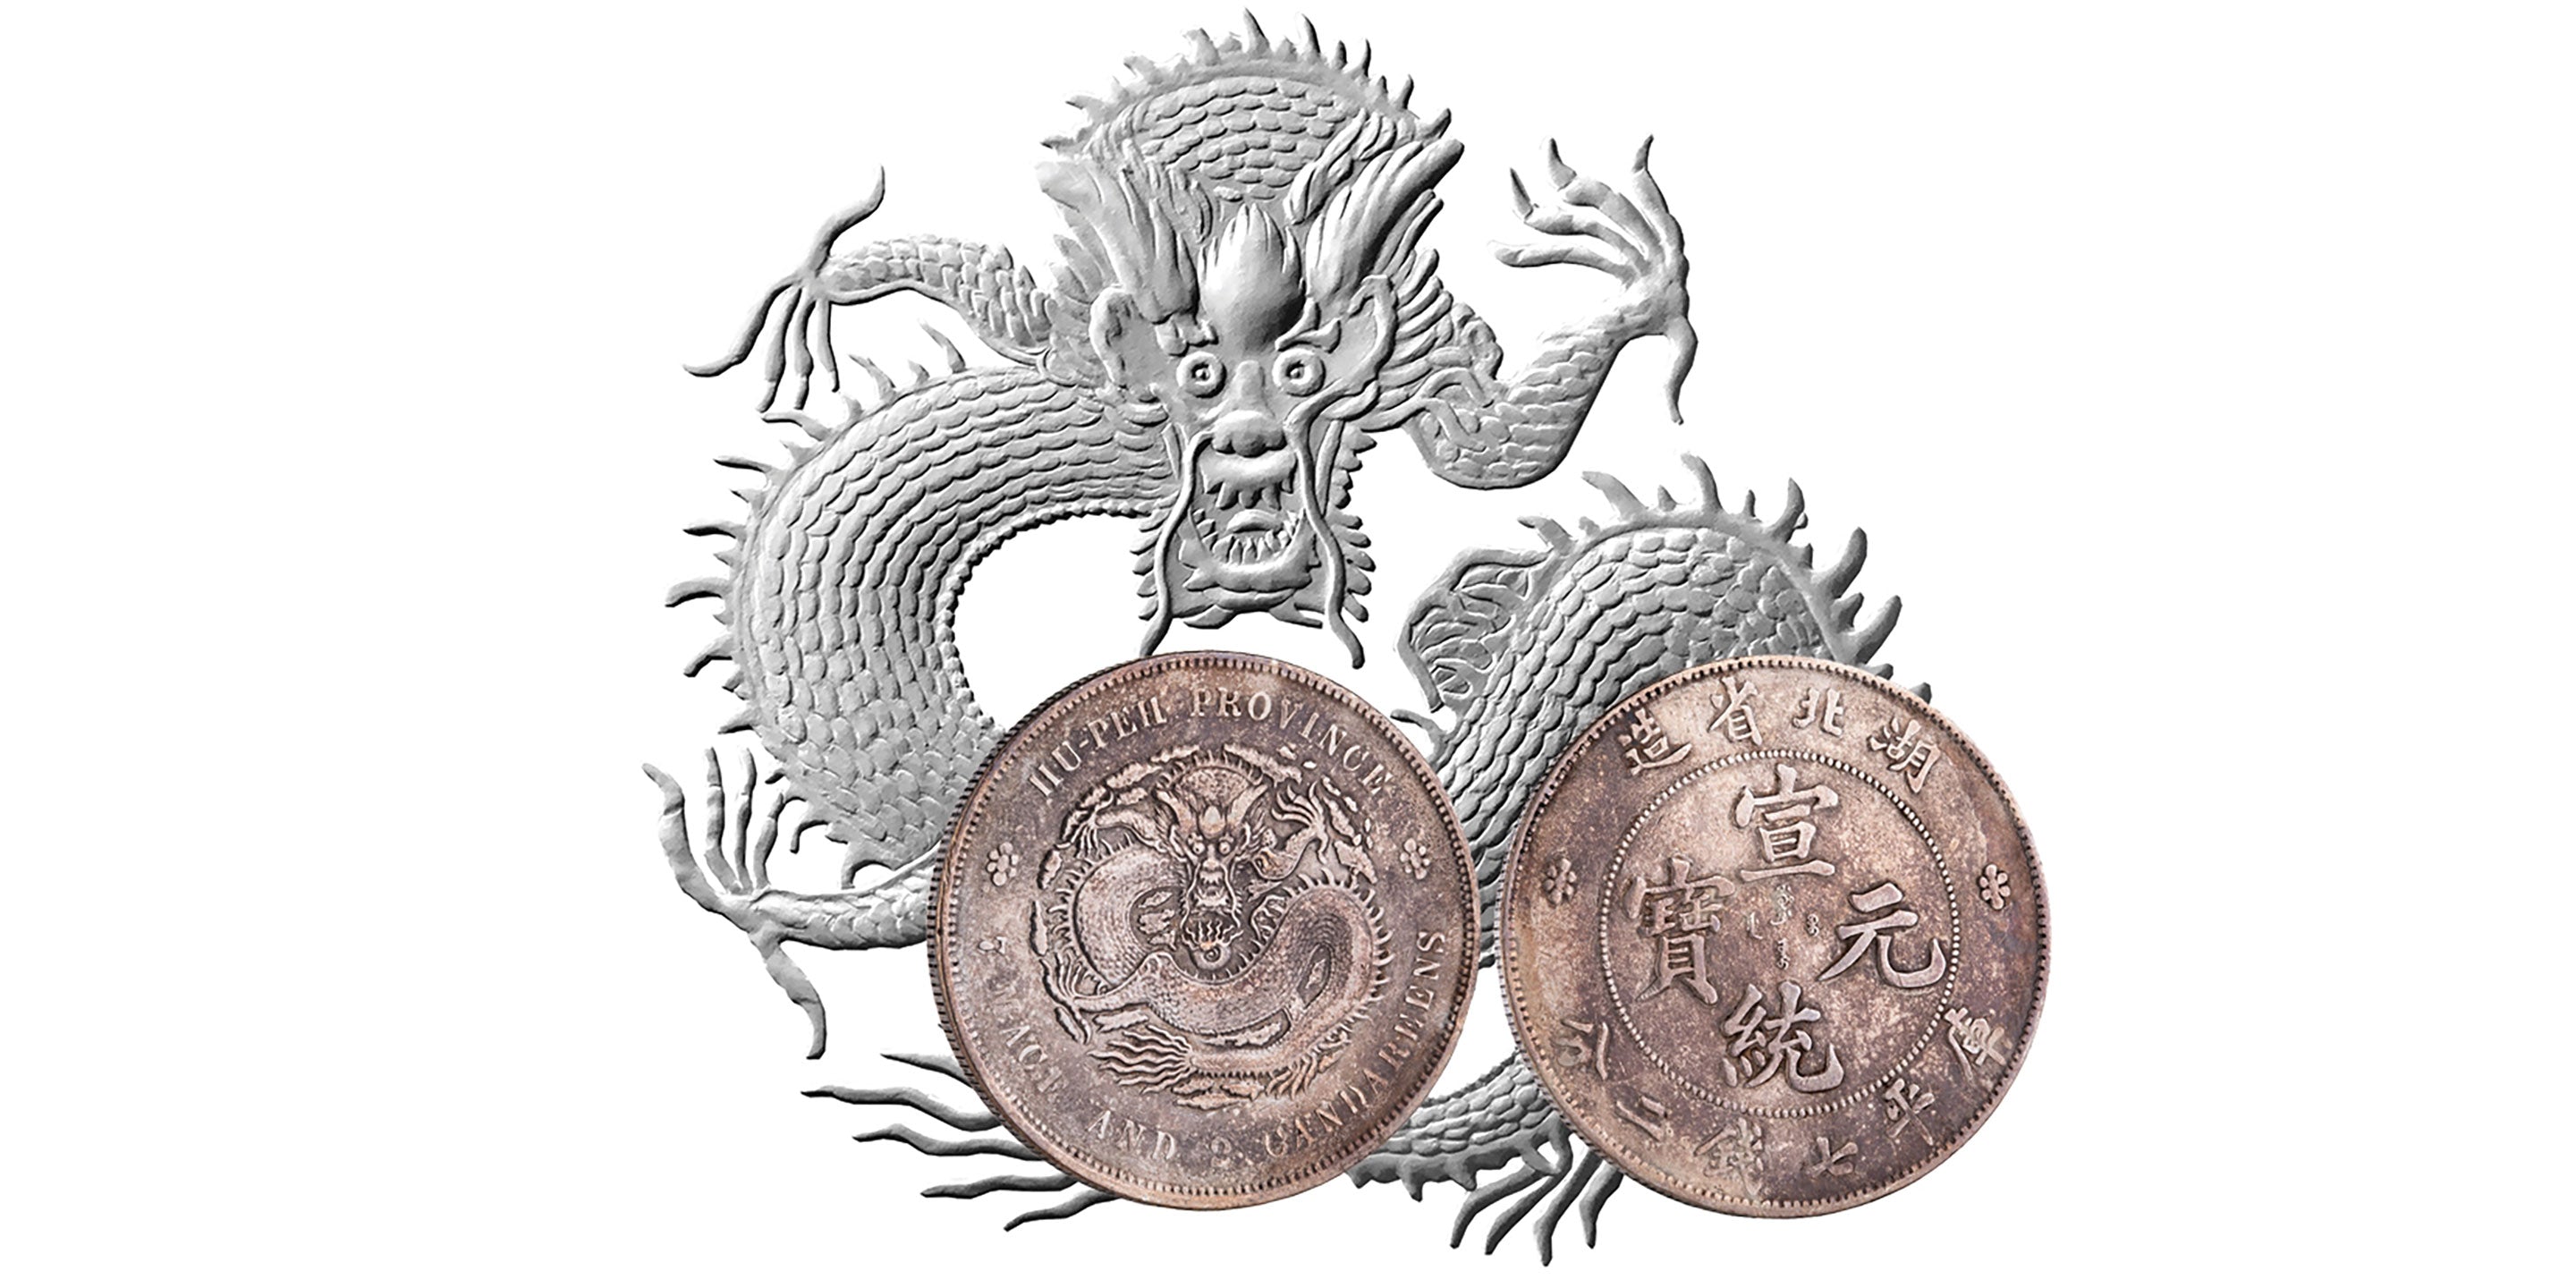 History of the Chinese Trade Dollar